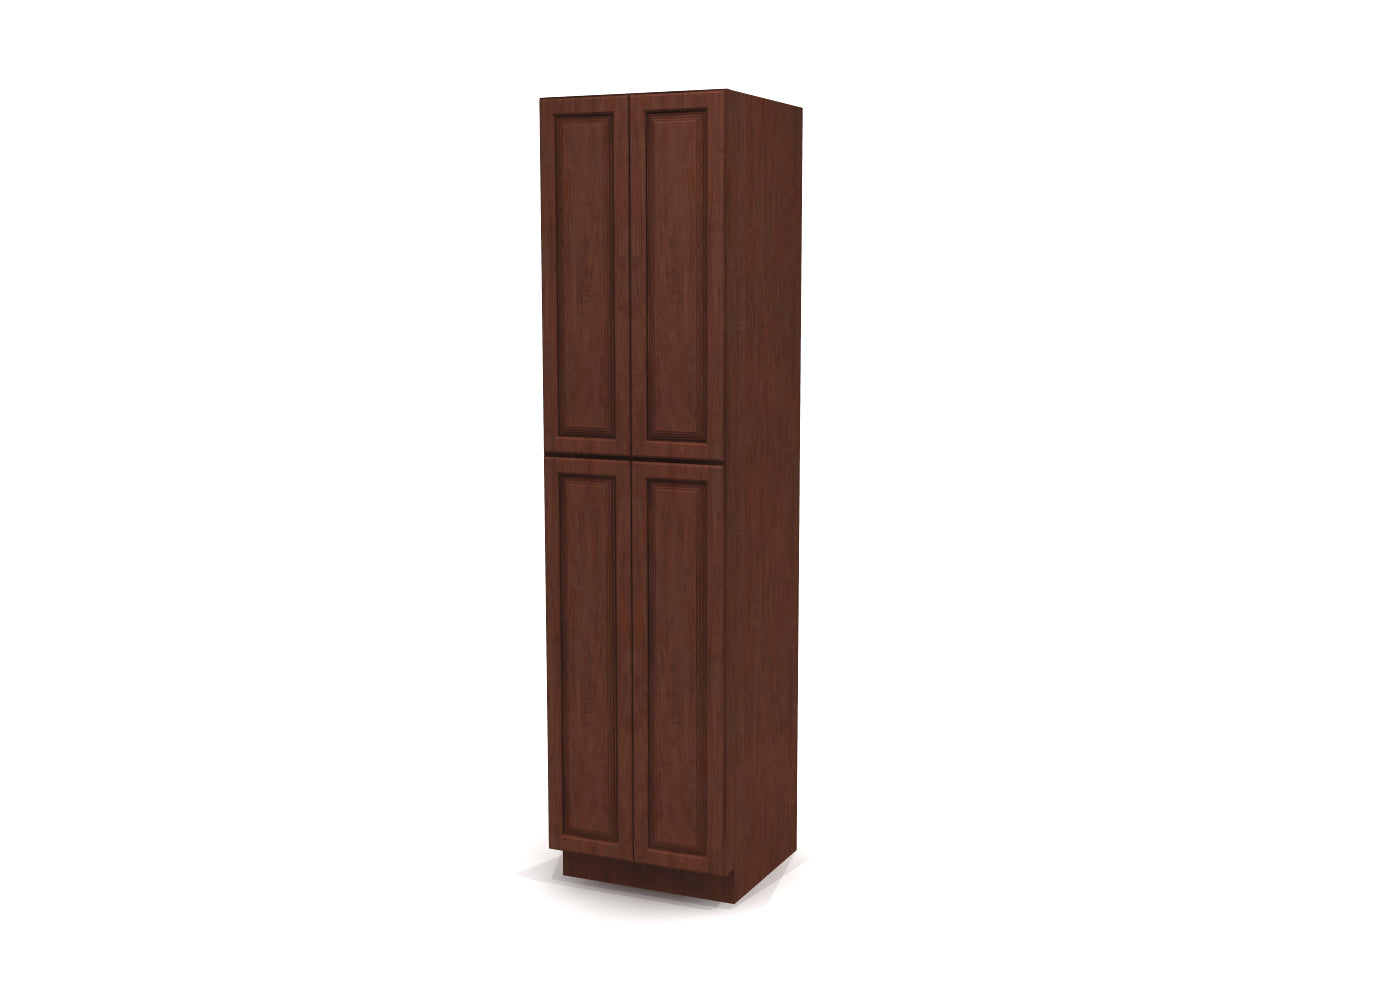 Utility Pantry Double Door 96" by 24" Wide Cherry Raised Panel Cabinet